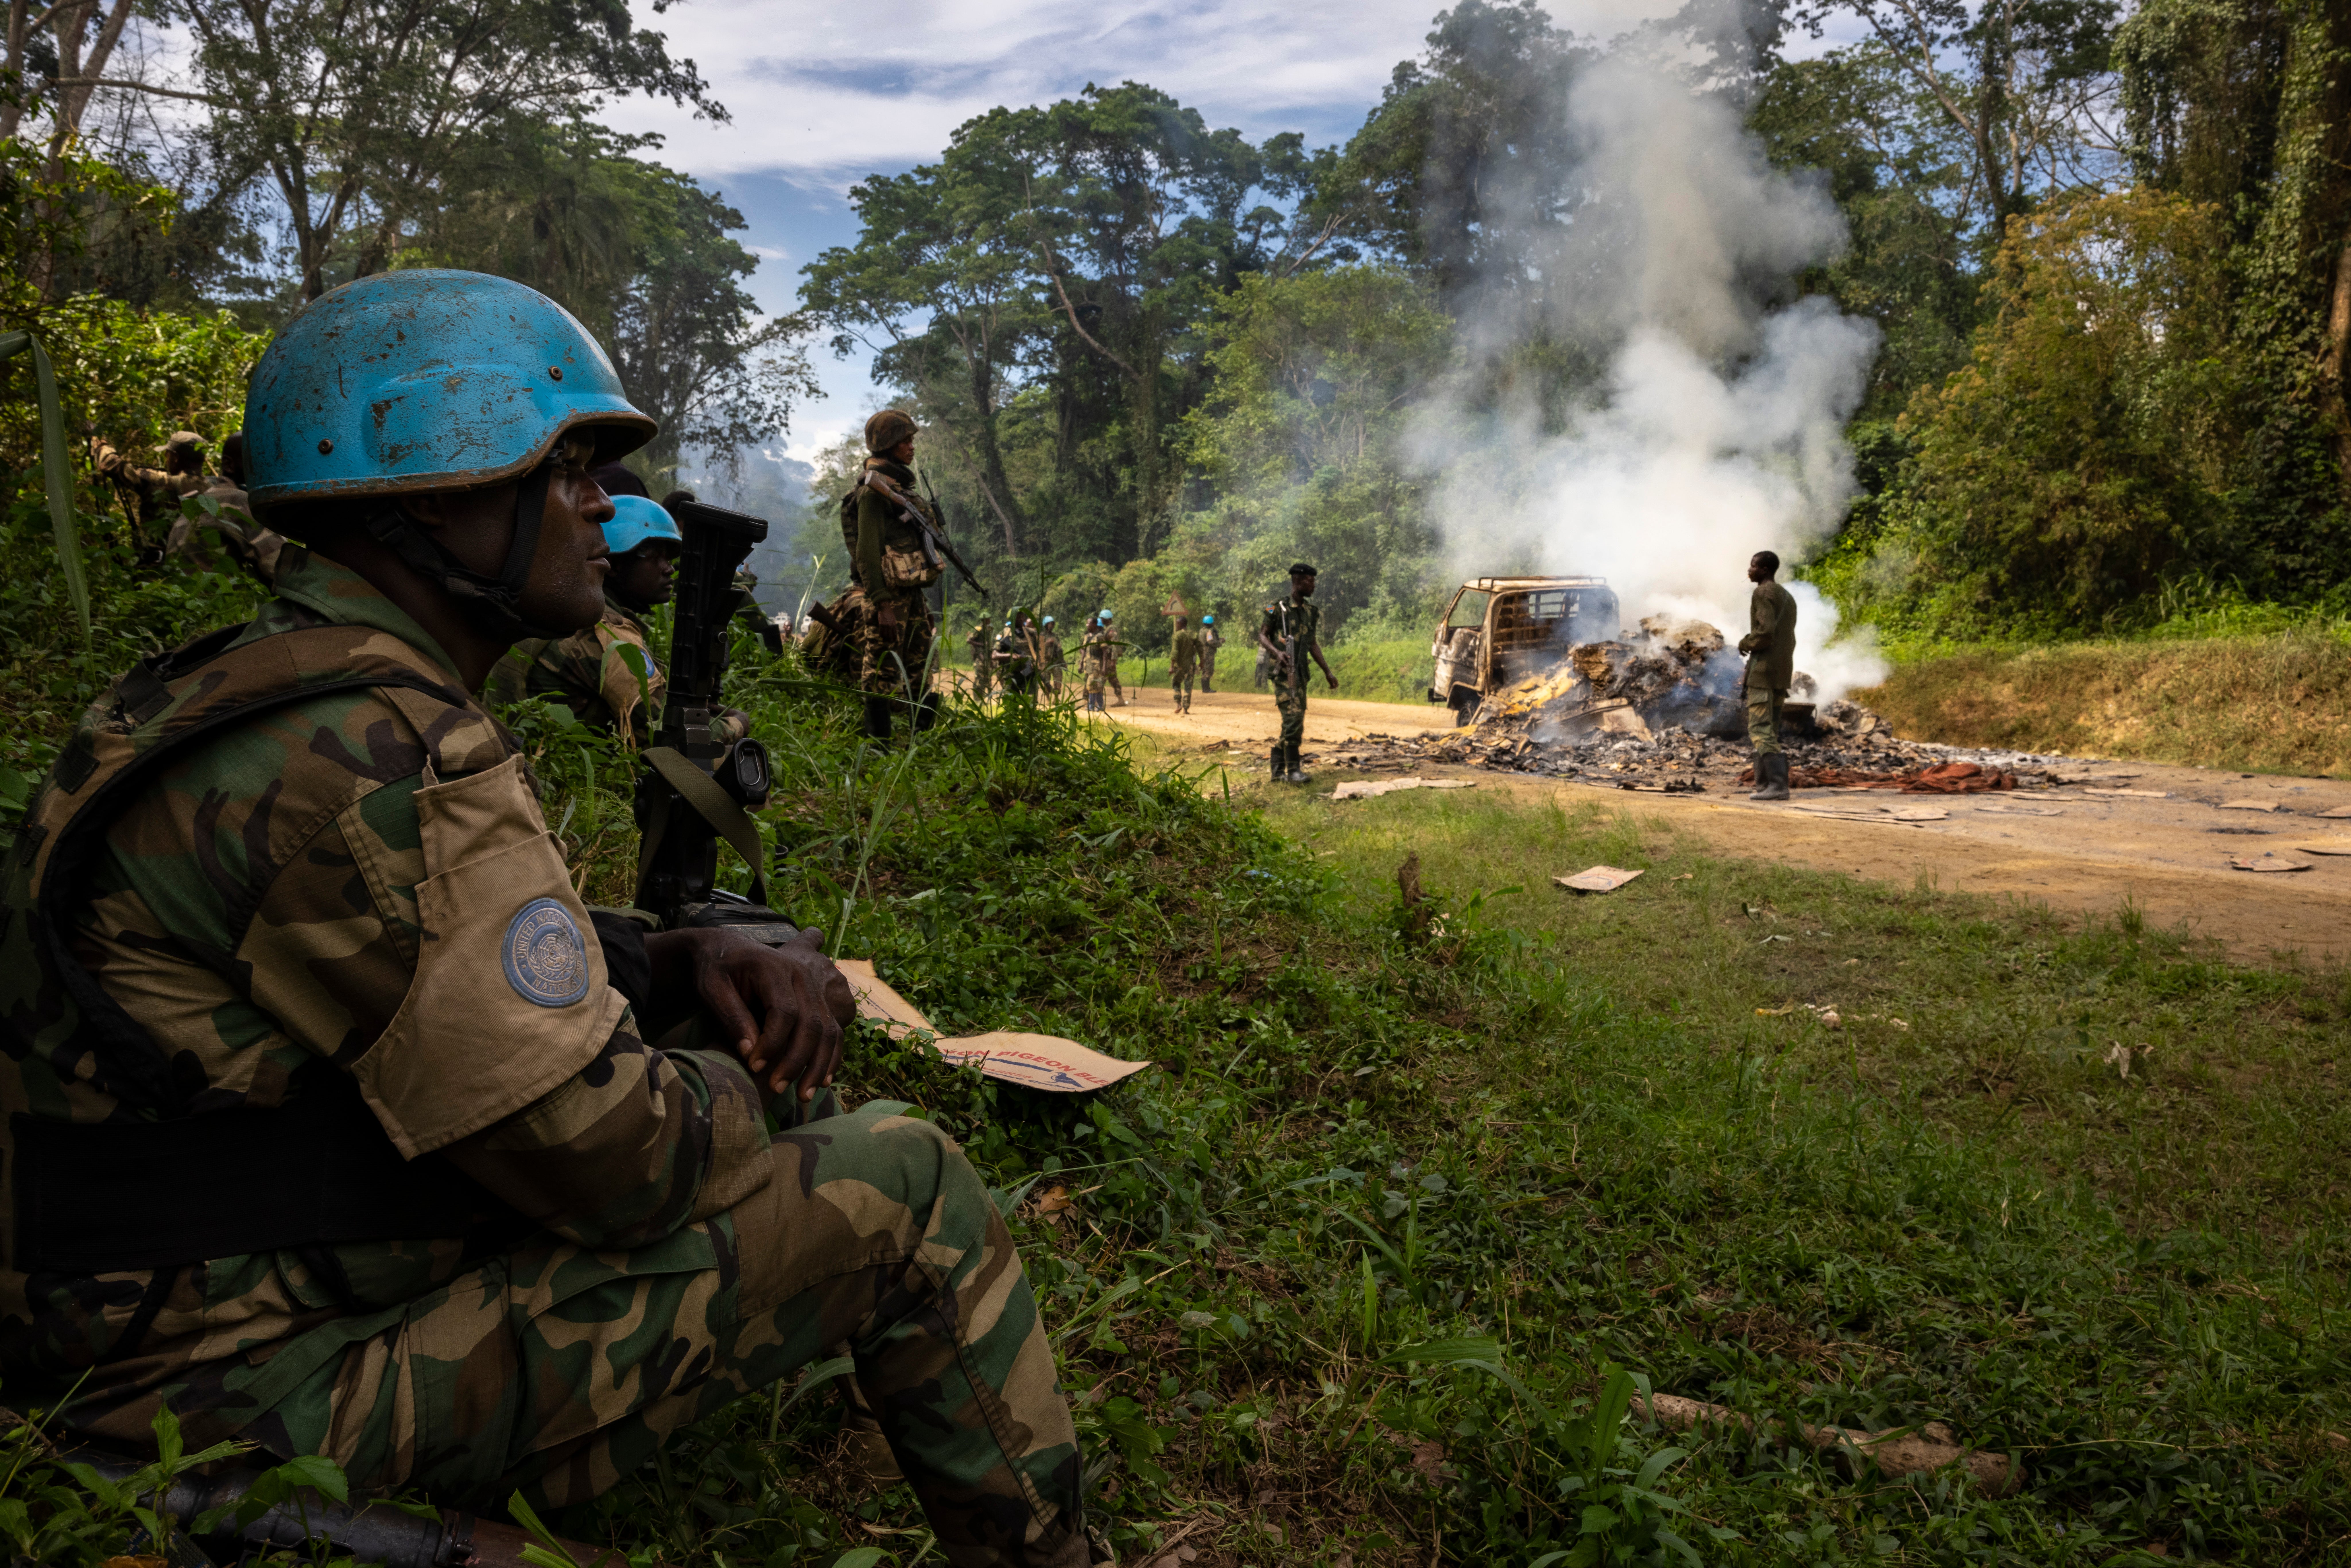 Congolese soldiers have been fighting the ADF’s insurgency near the Ugandan border